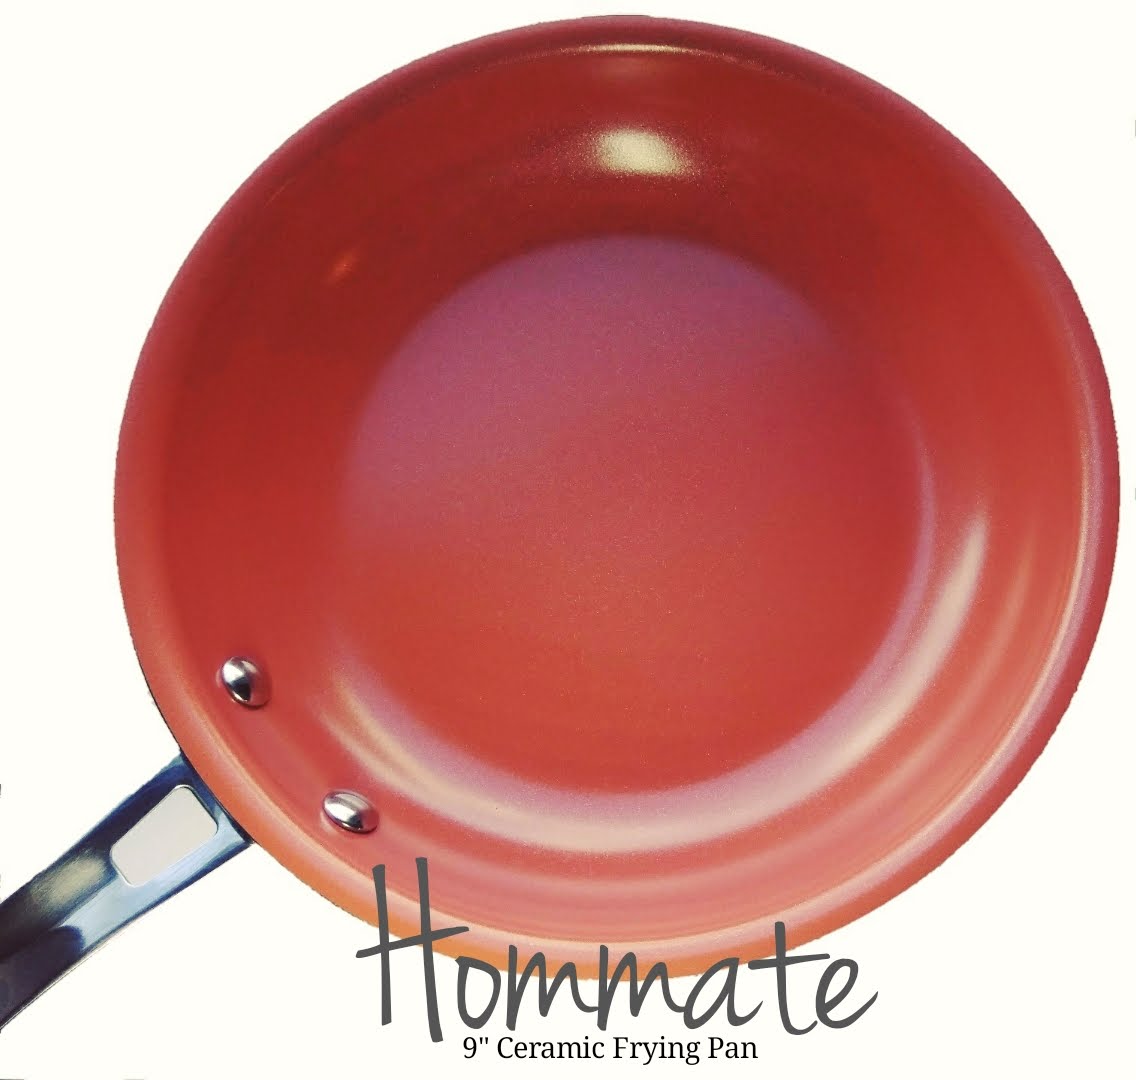 The 9" Hommate Tipan Ceramic Frying Pan - Preferred Over a Rachel Ray Cookware Set and Spurs JCs Cookware Project of 2018.